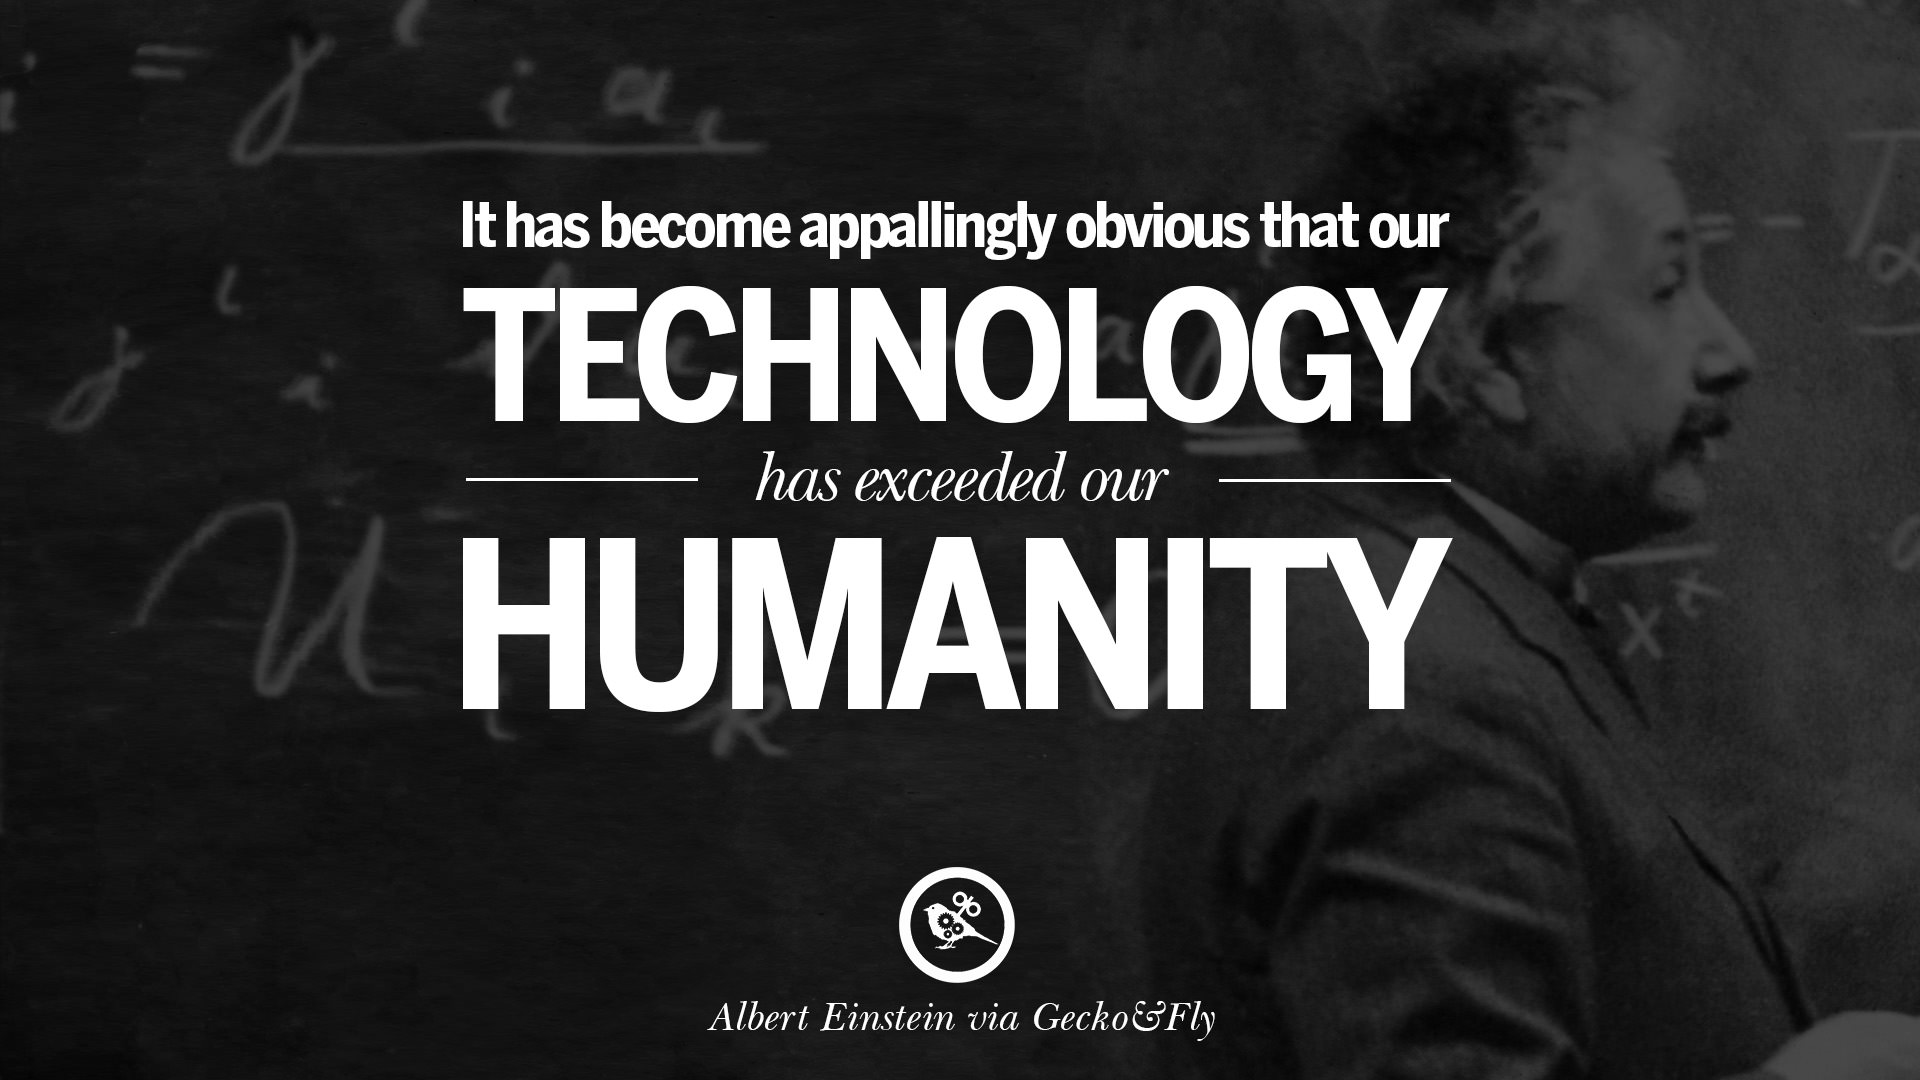 Technology has exceeded our humanity express your opinion?